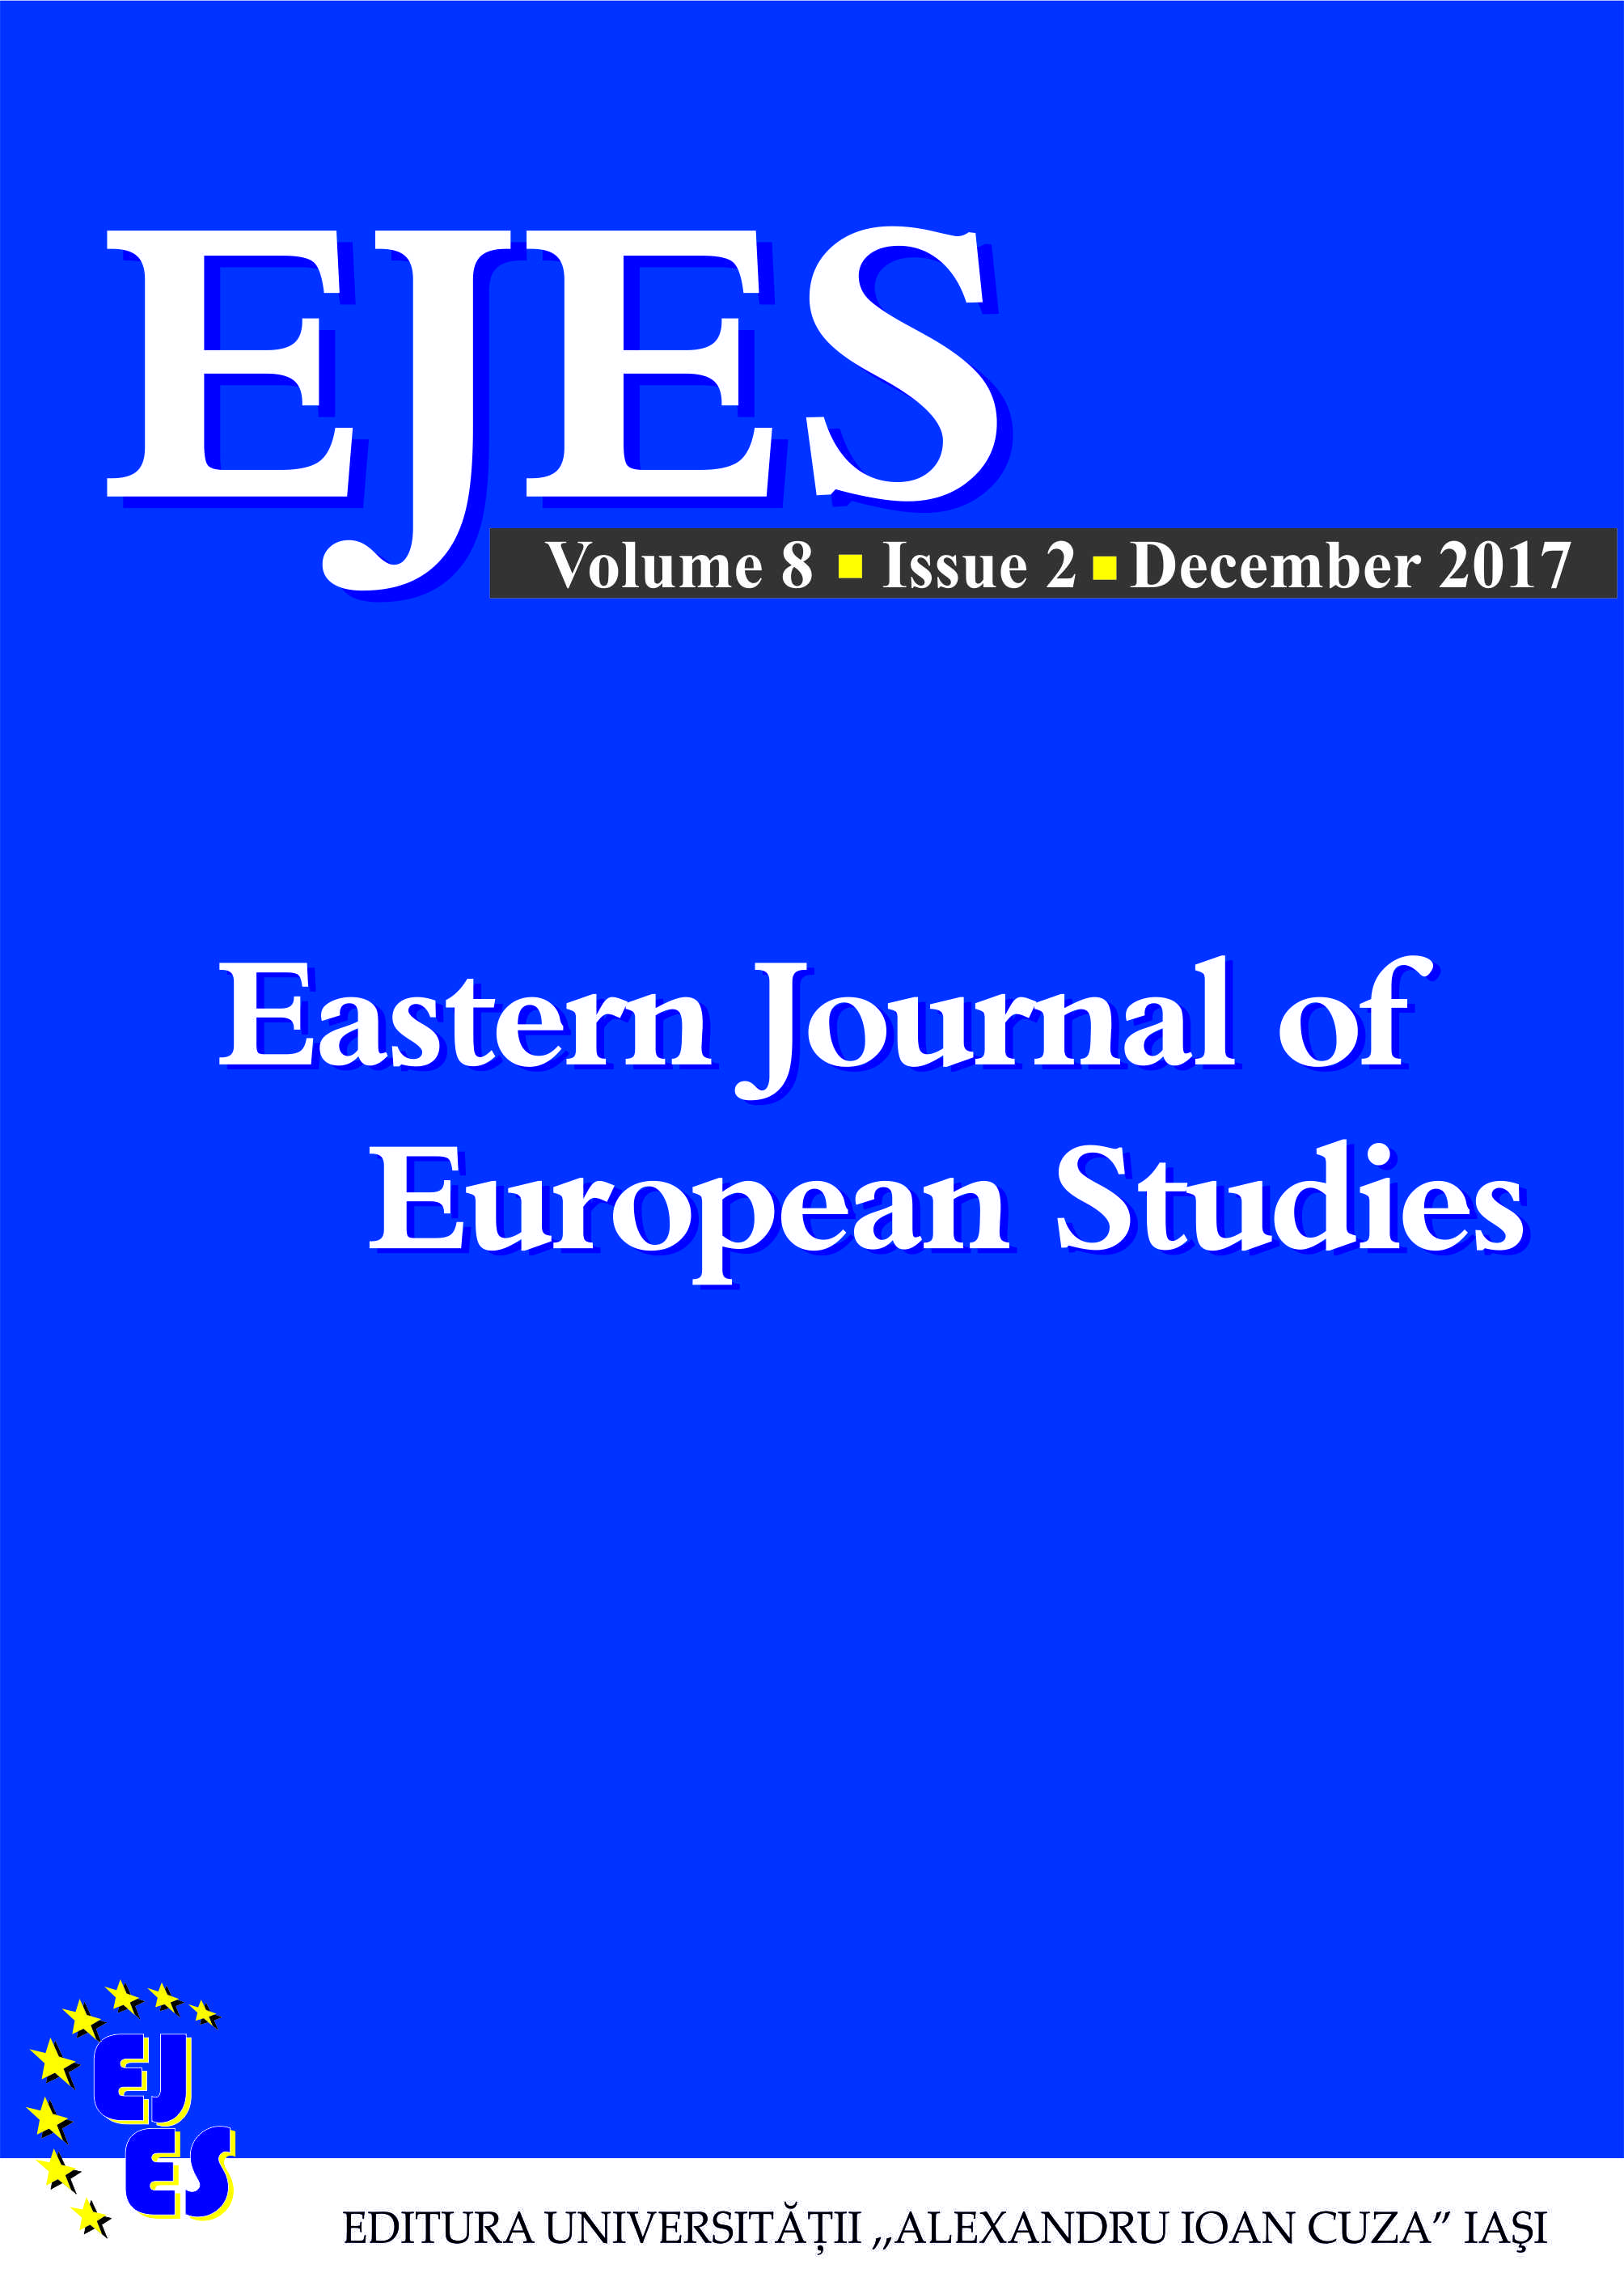 OOK REVIEW - Gabriela Carmen Pascariu and Maria Adelaide Pedrosa da Silva Duarte (eds.), Core-Periphery Patterns across the European Union. Case Studies and Lessons from Eastern and Southern Europe Cover Image